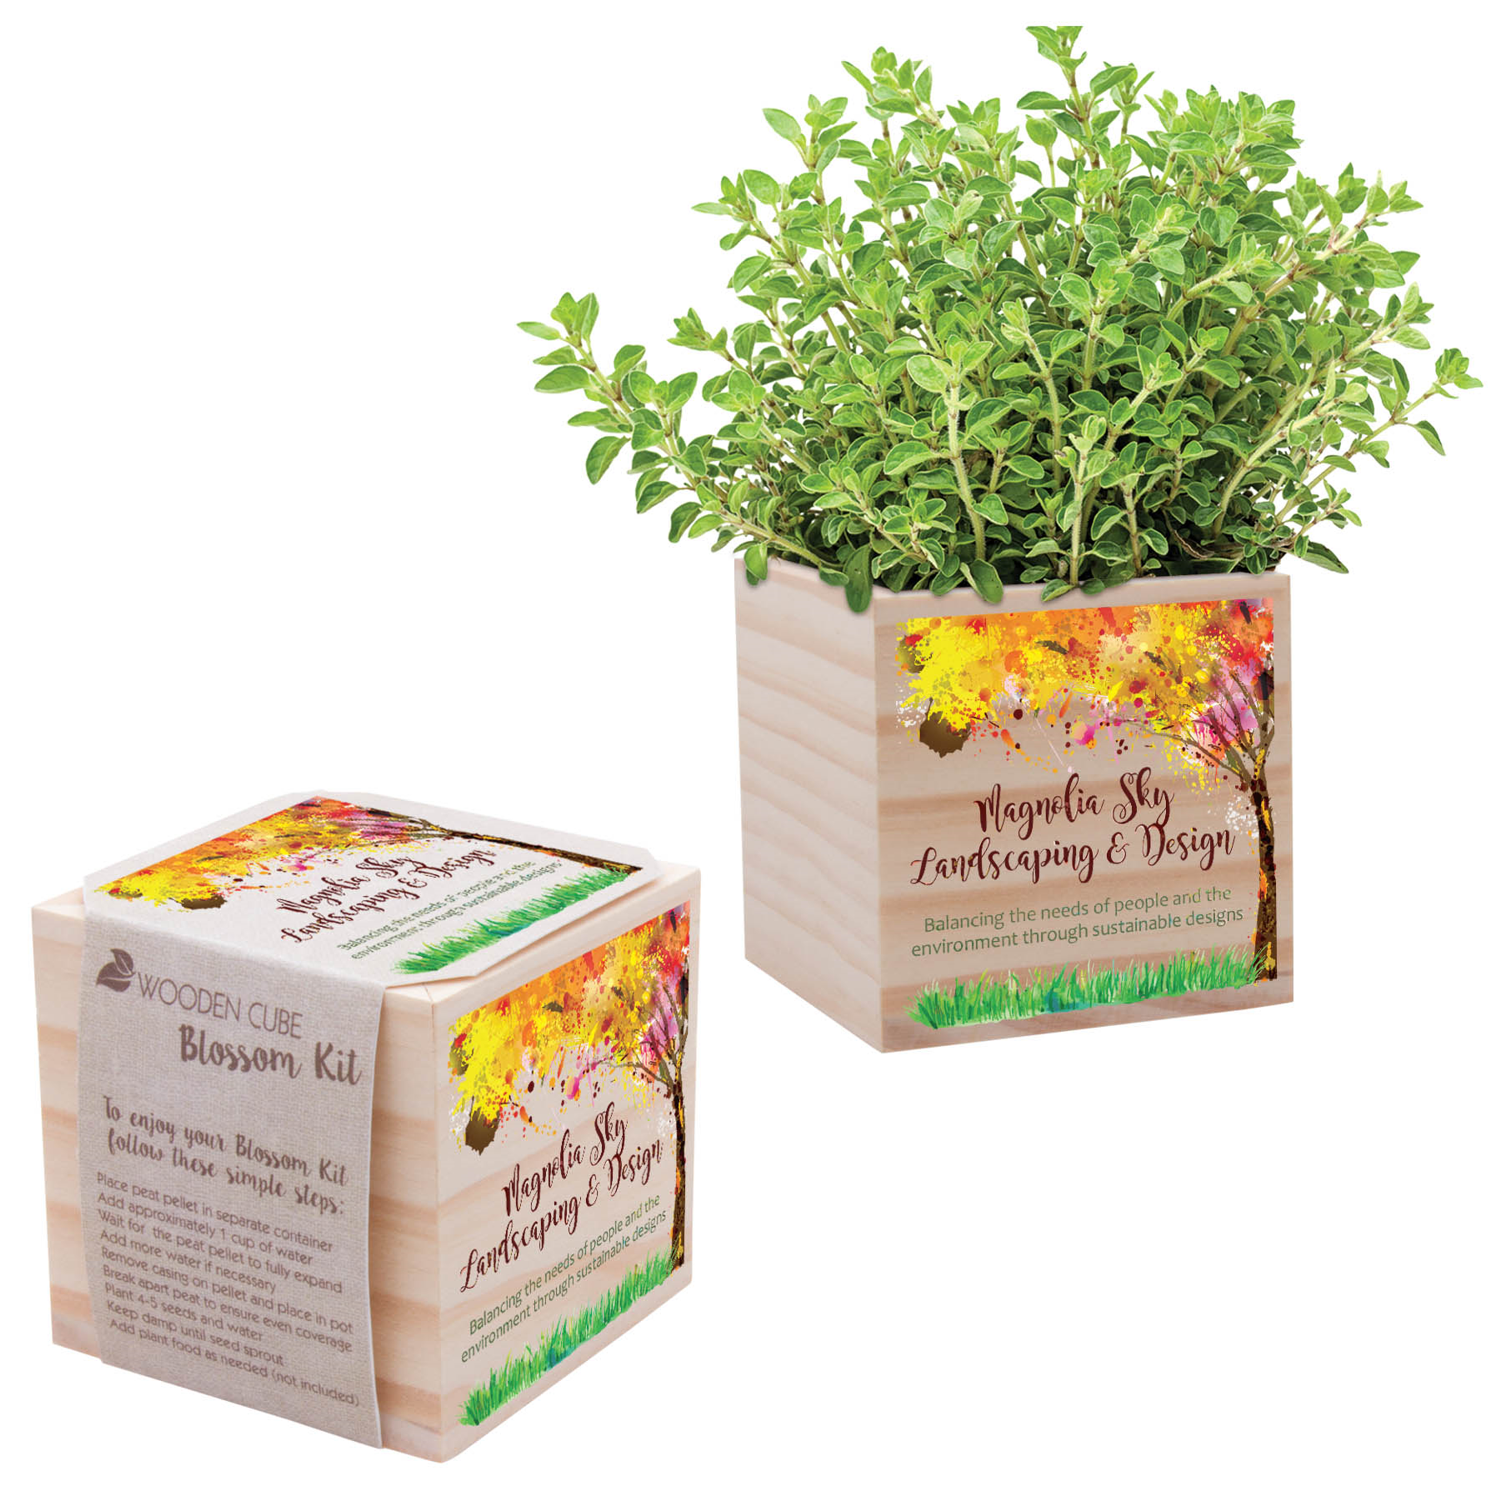 Wooden Cube Planting Kit Promotional Product